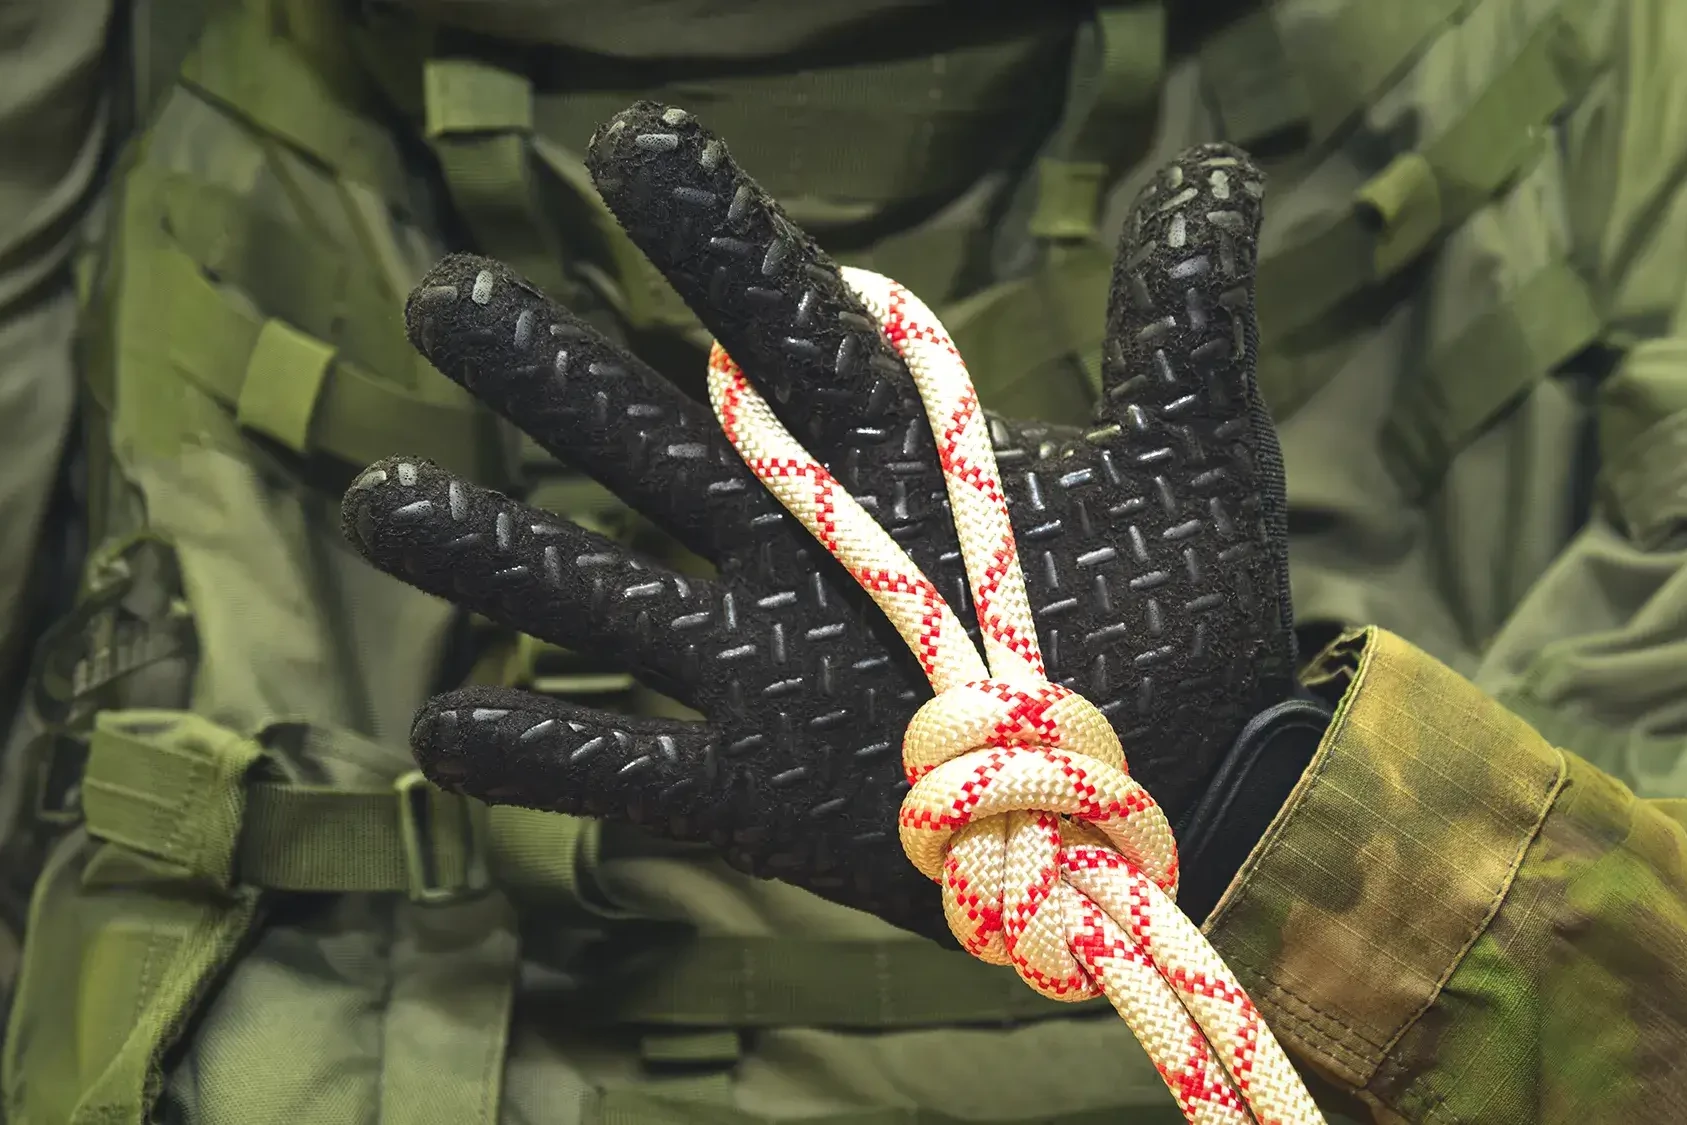 Operation supply drop knot tying challenge